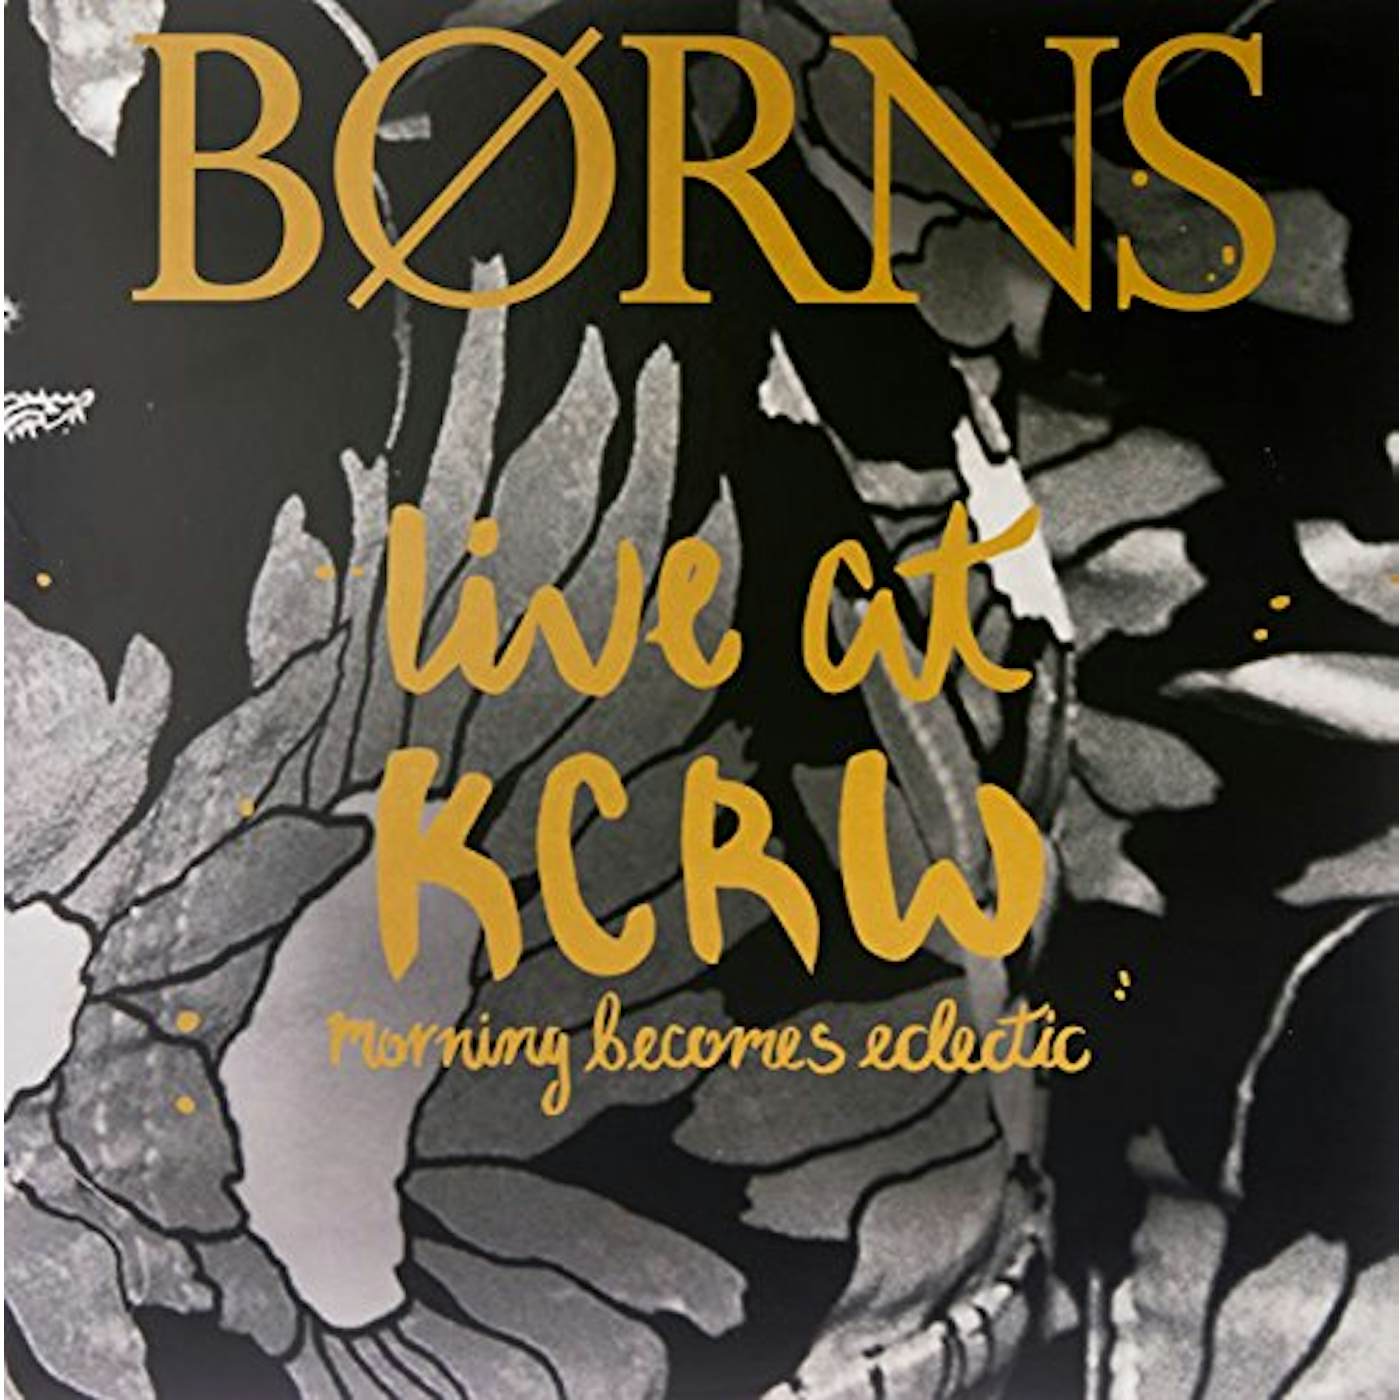 BØRNS LIVE ON KCRWS MORNING BECOMES ECLECTIC Vinyl Record